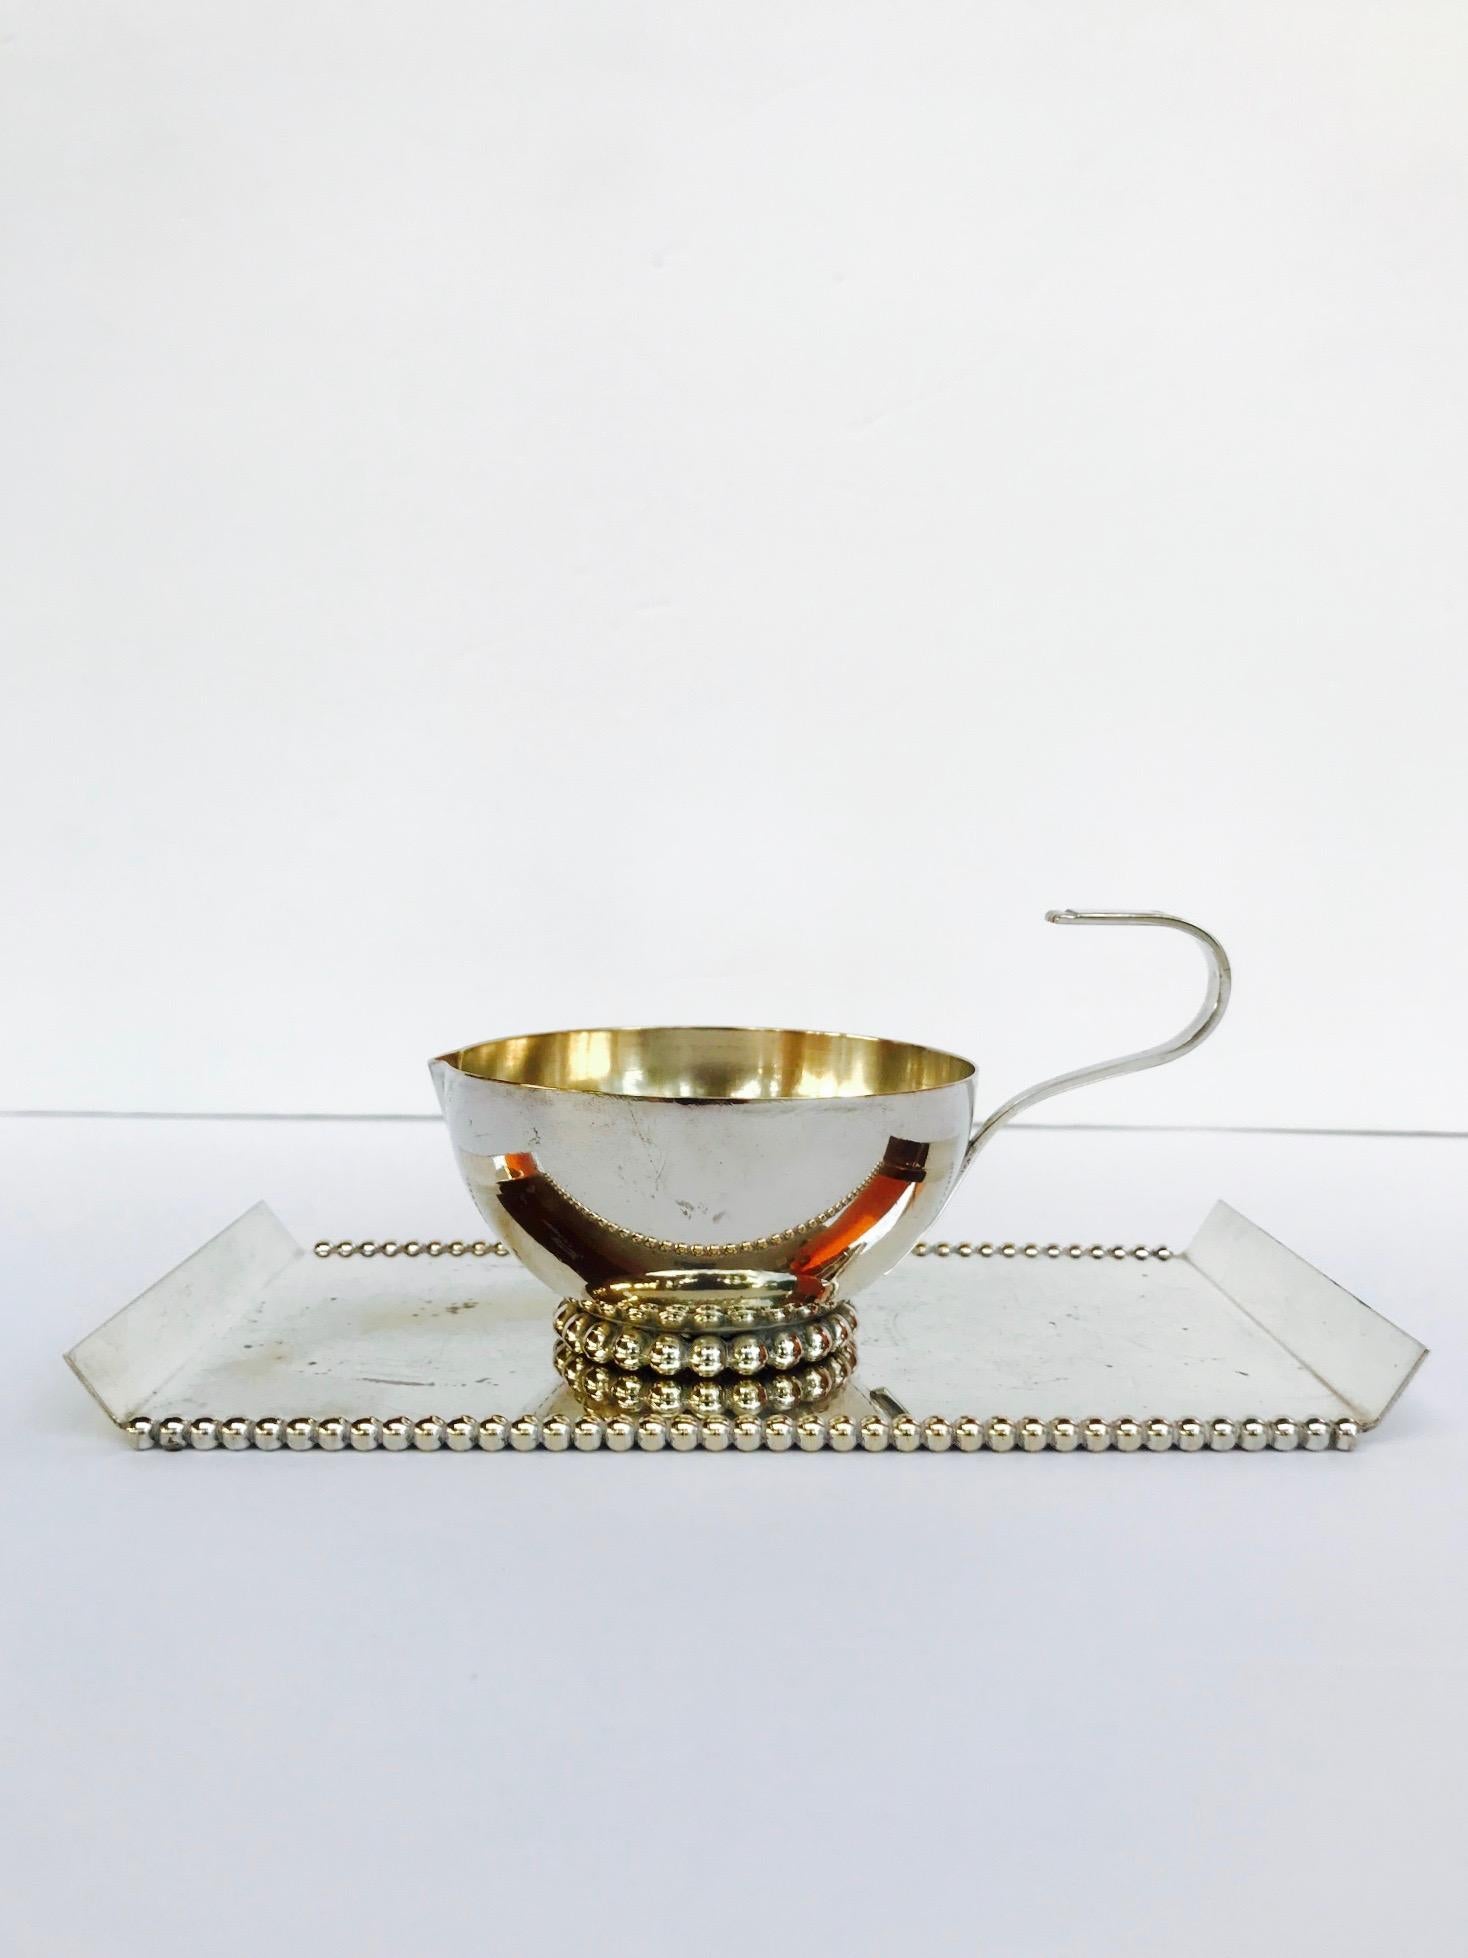 Vintage Silver Plated Sugar and Creamer Serving Set, Italy, C. 1970s In Good Condition For Sale In Fort Lauderdale, FL